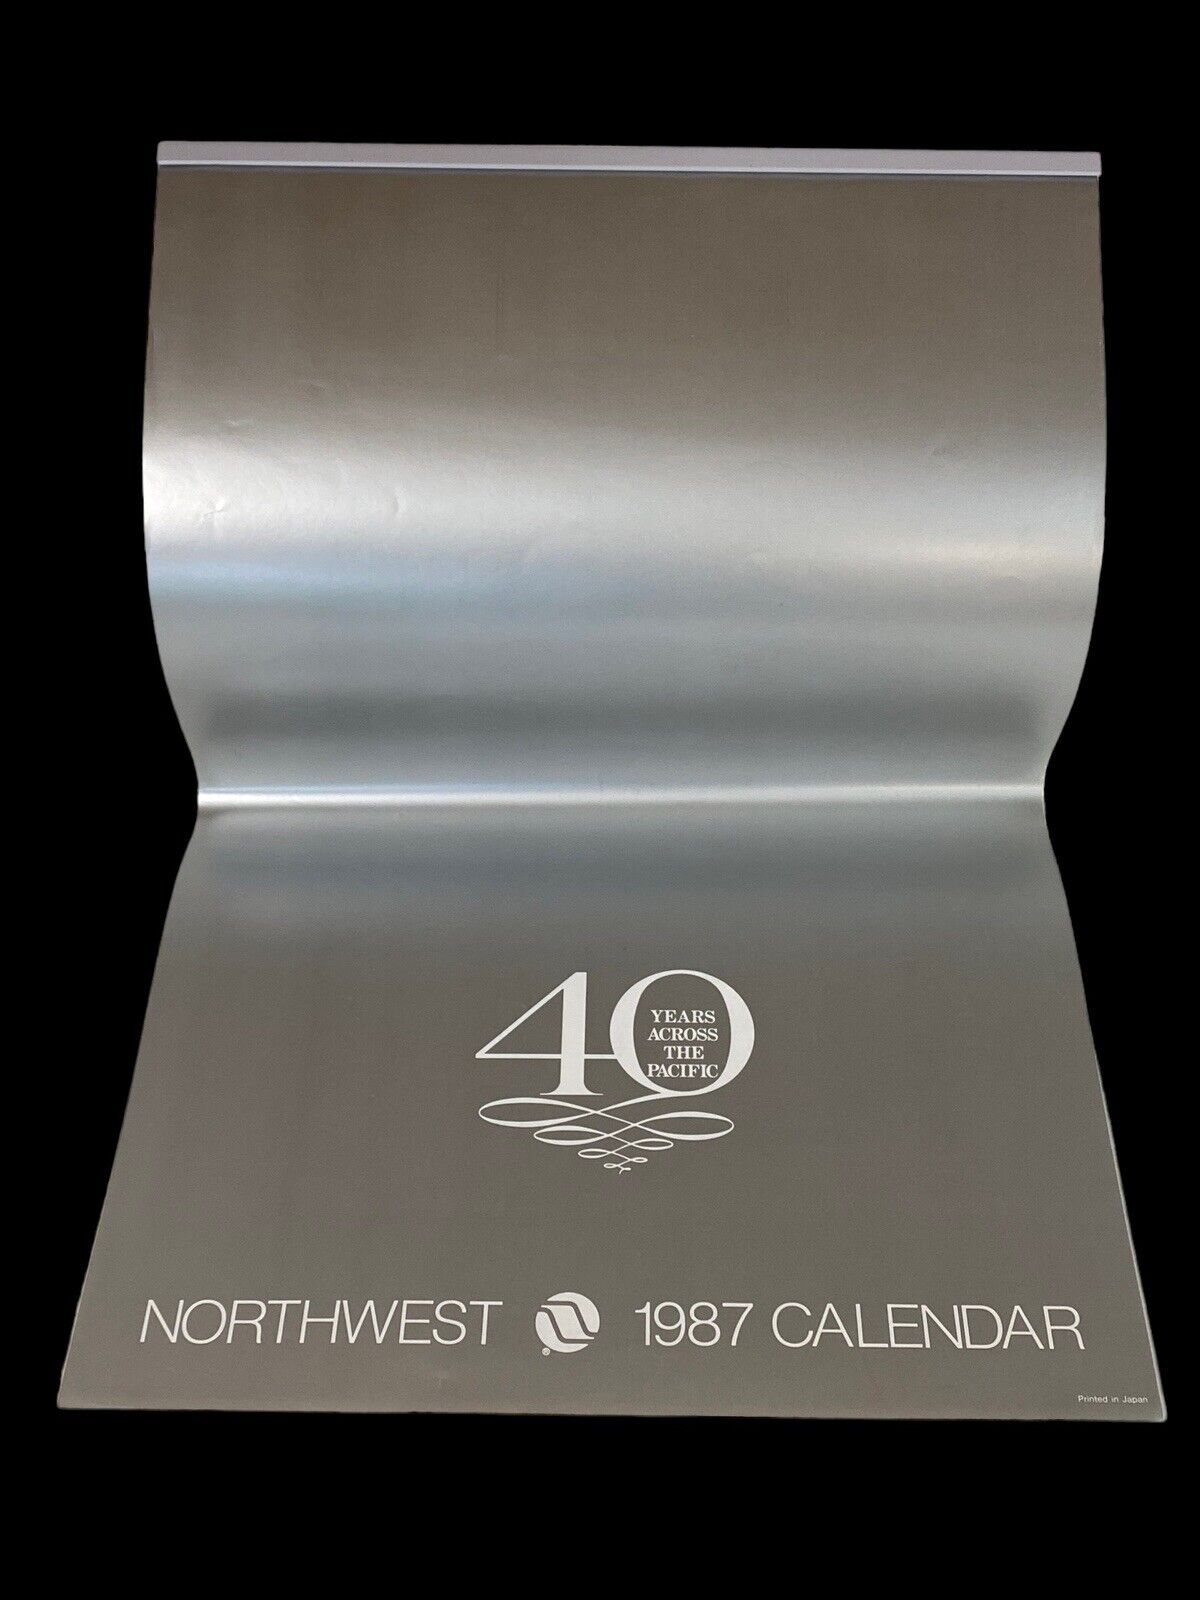 Calendar 1987 NORTHWEST AIRLINES Large Wall 40 Years Across Pacific 21” x 13”